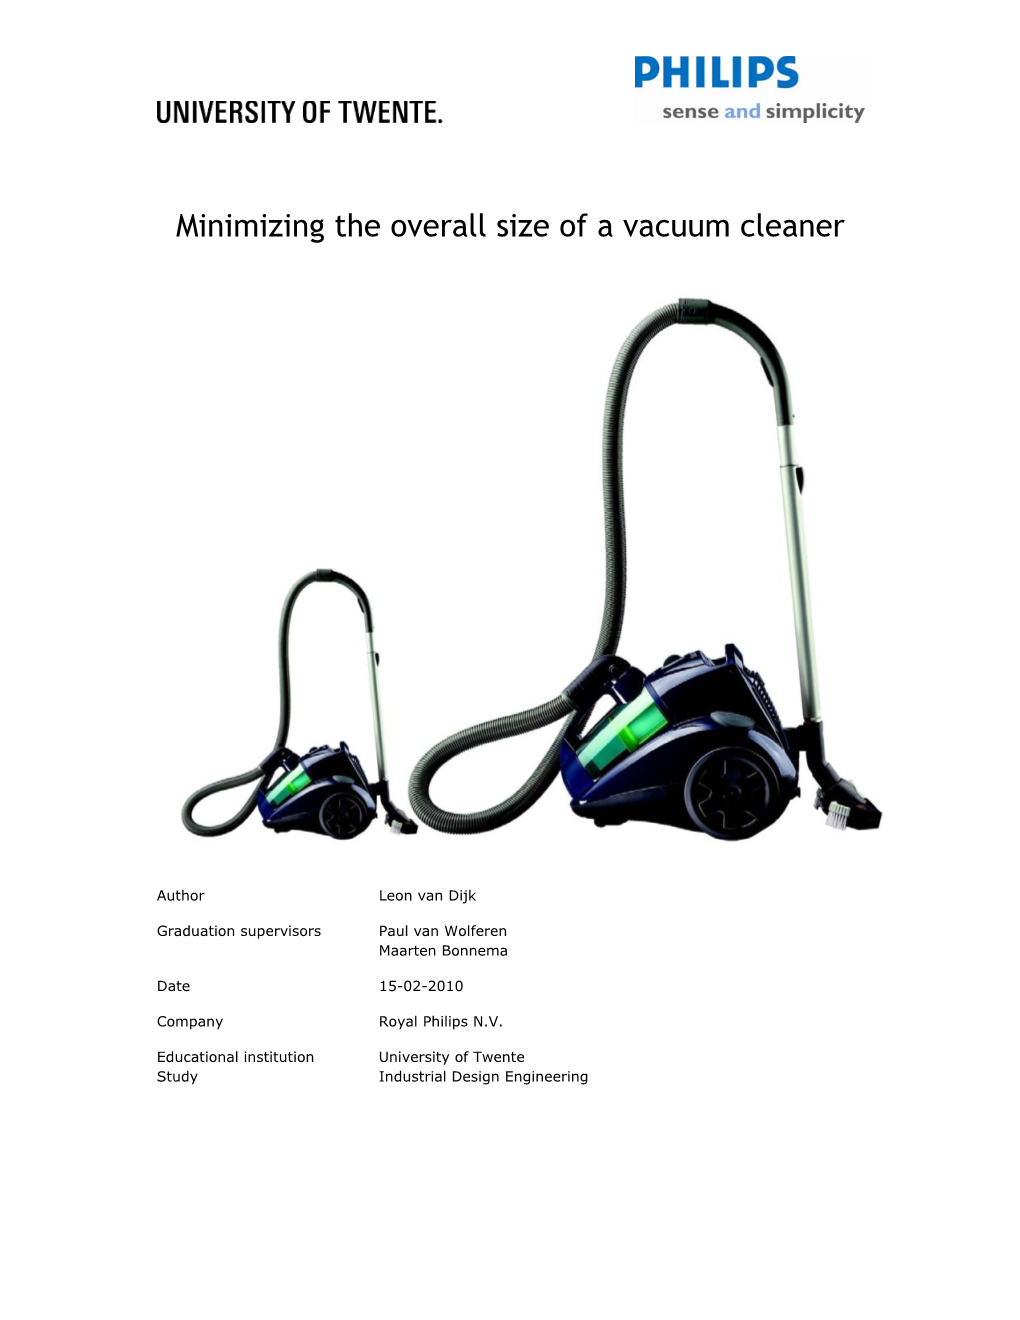 Minimizing the Overall Size of a Vacuum Cleaner